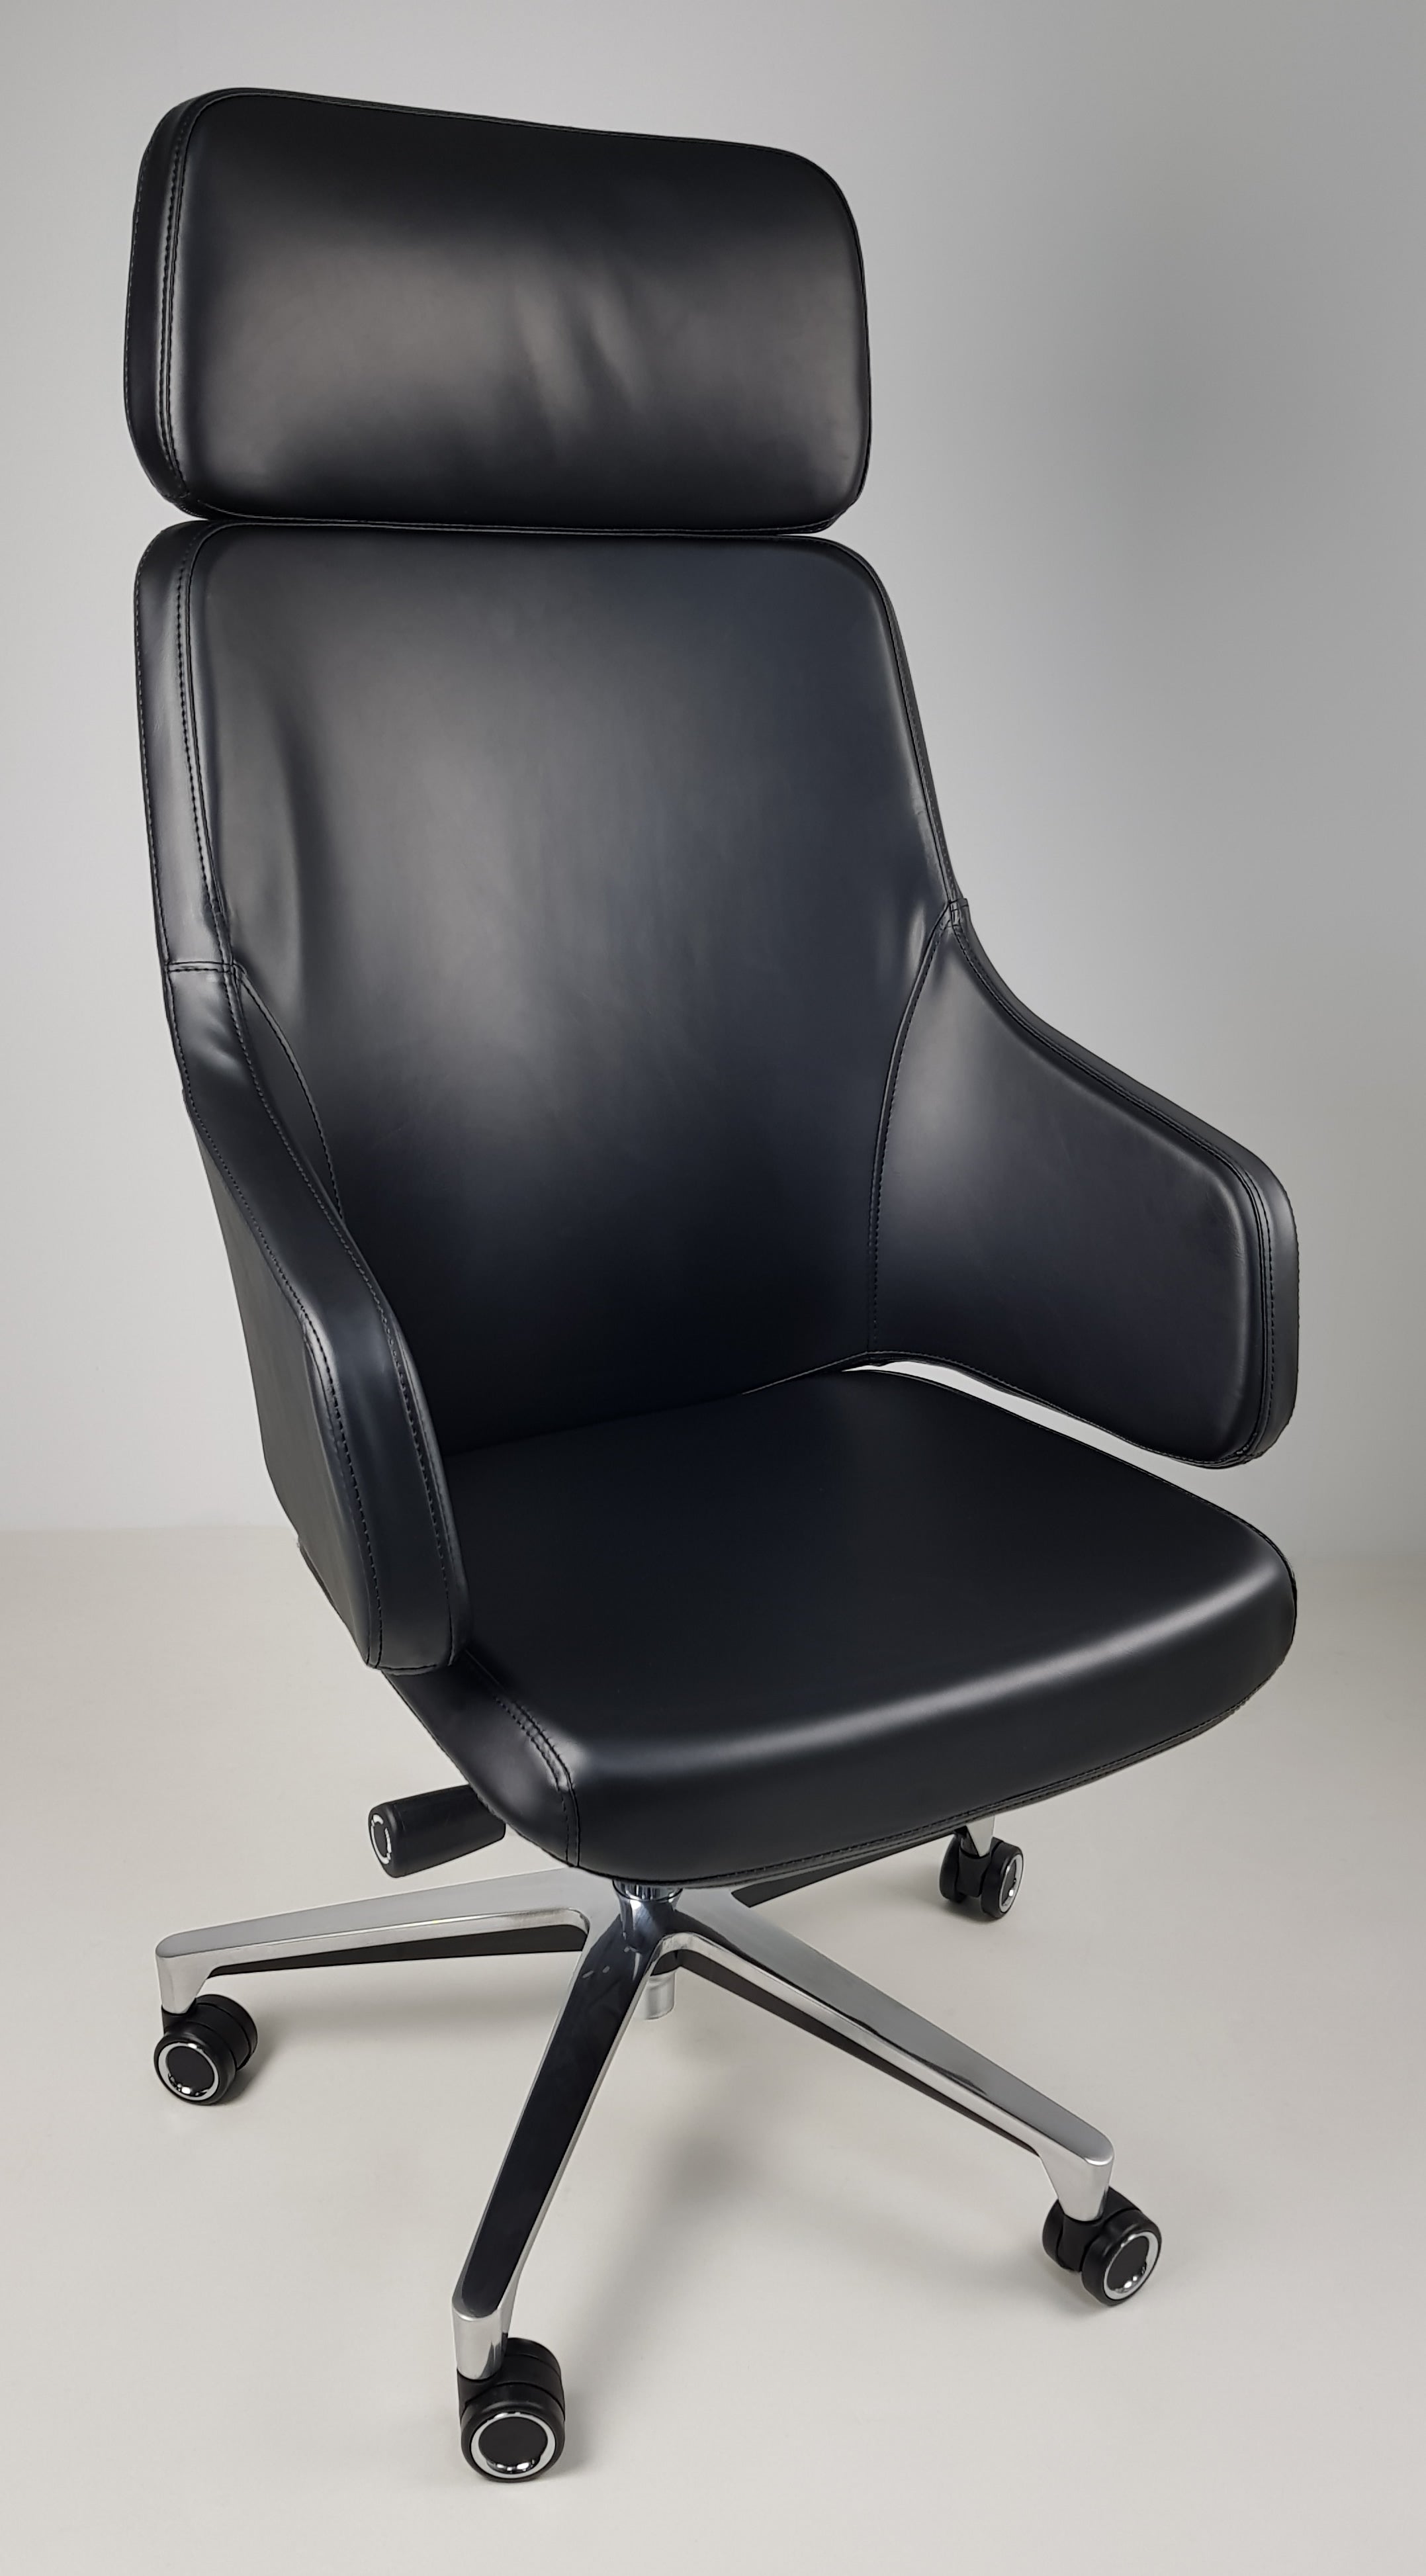 High Back Black Leather Executive Office Chair with Seat Slide - CHA-1823A North Yorkshire